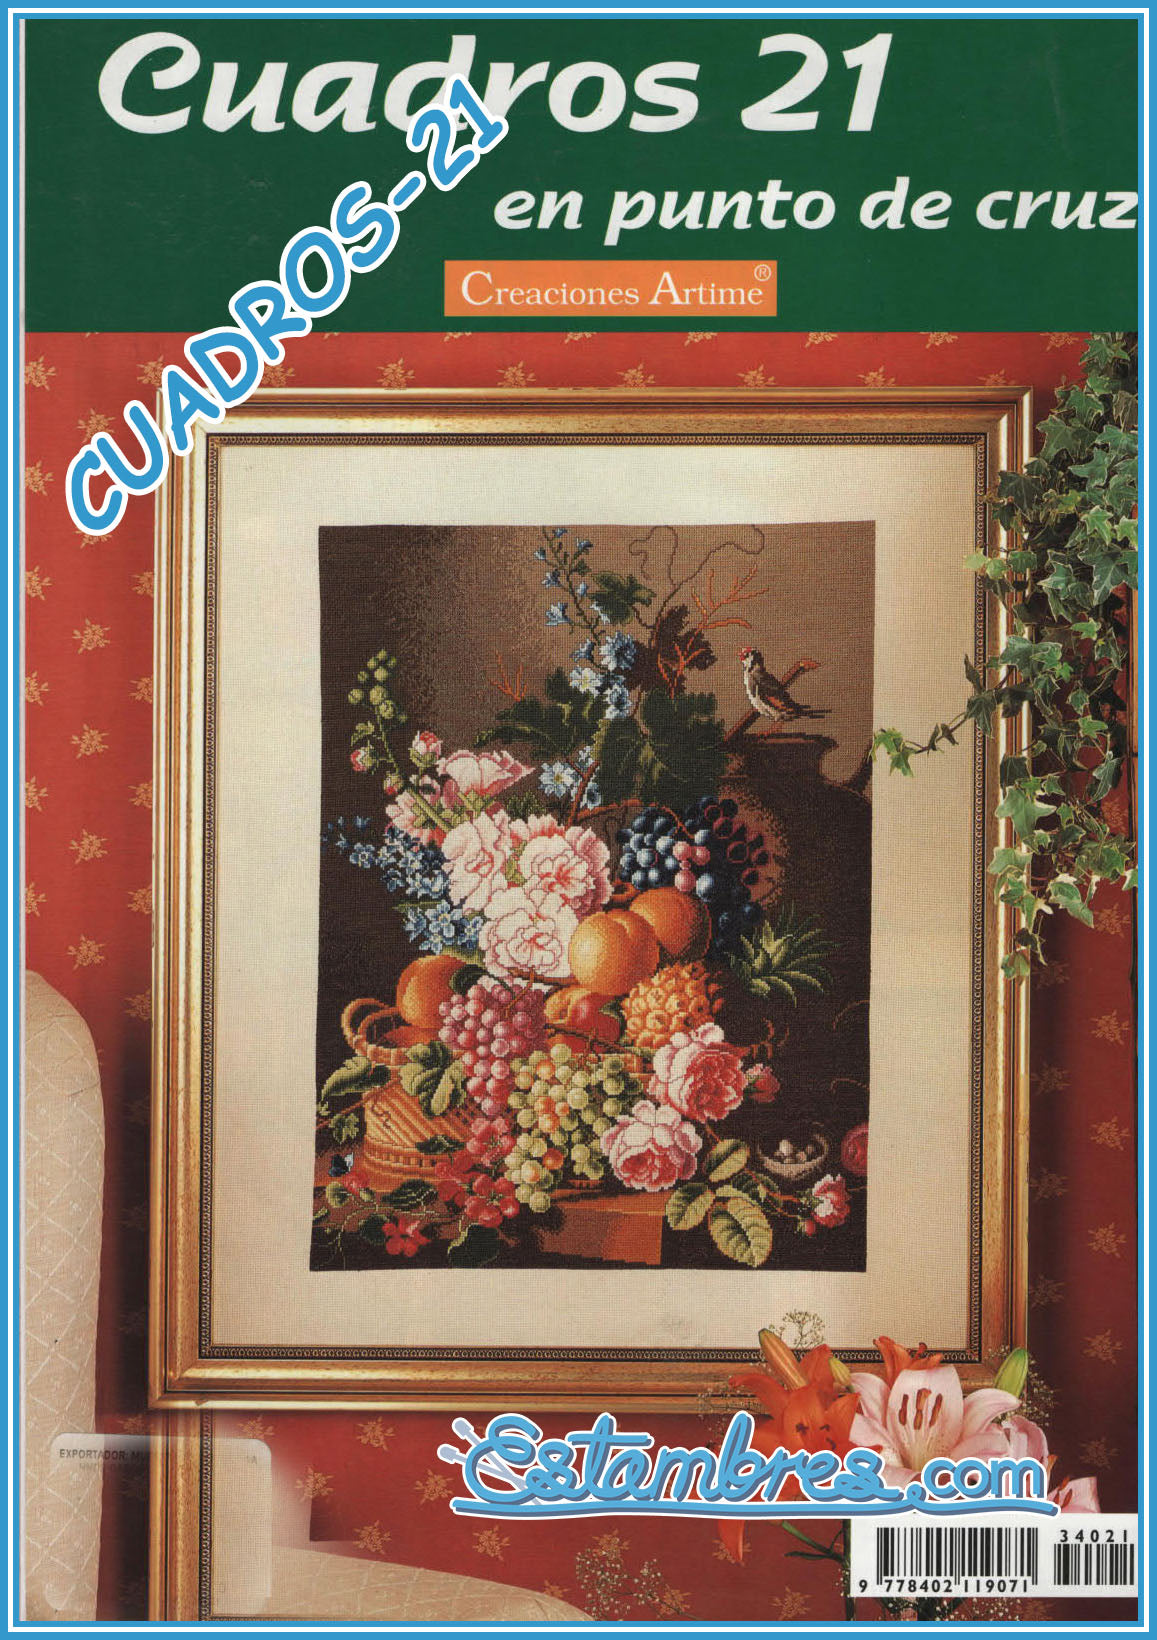 Embroidery Magazines 